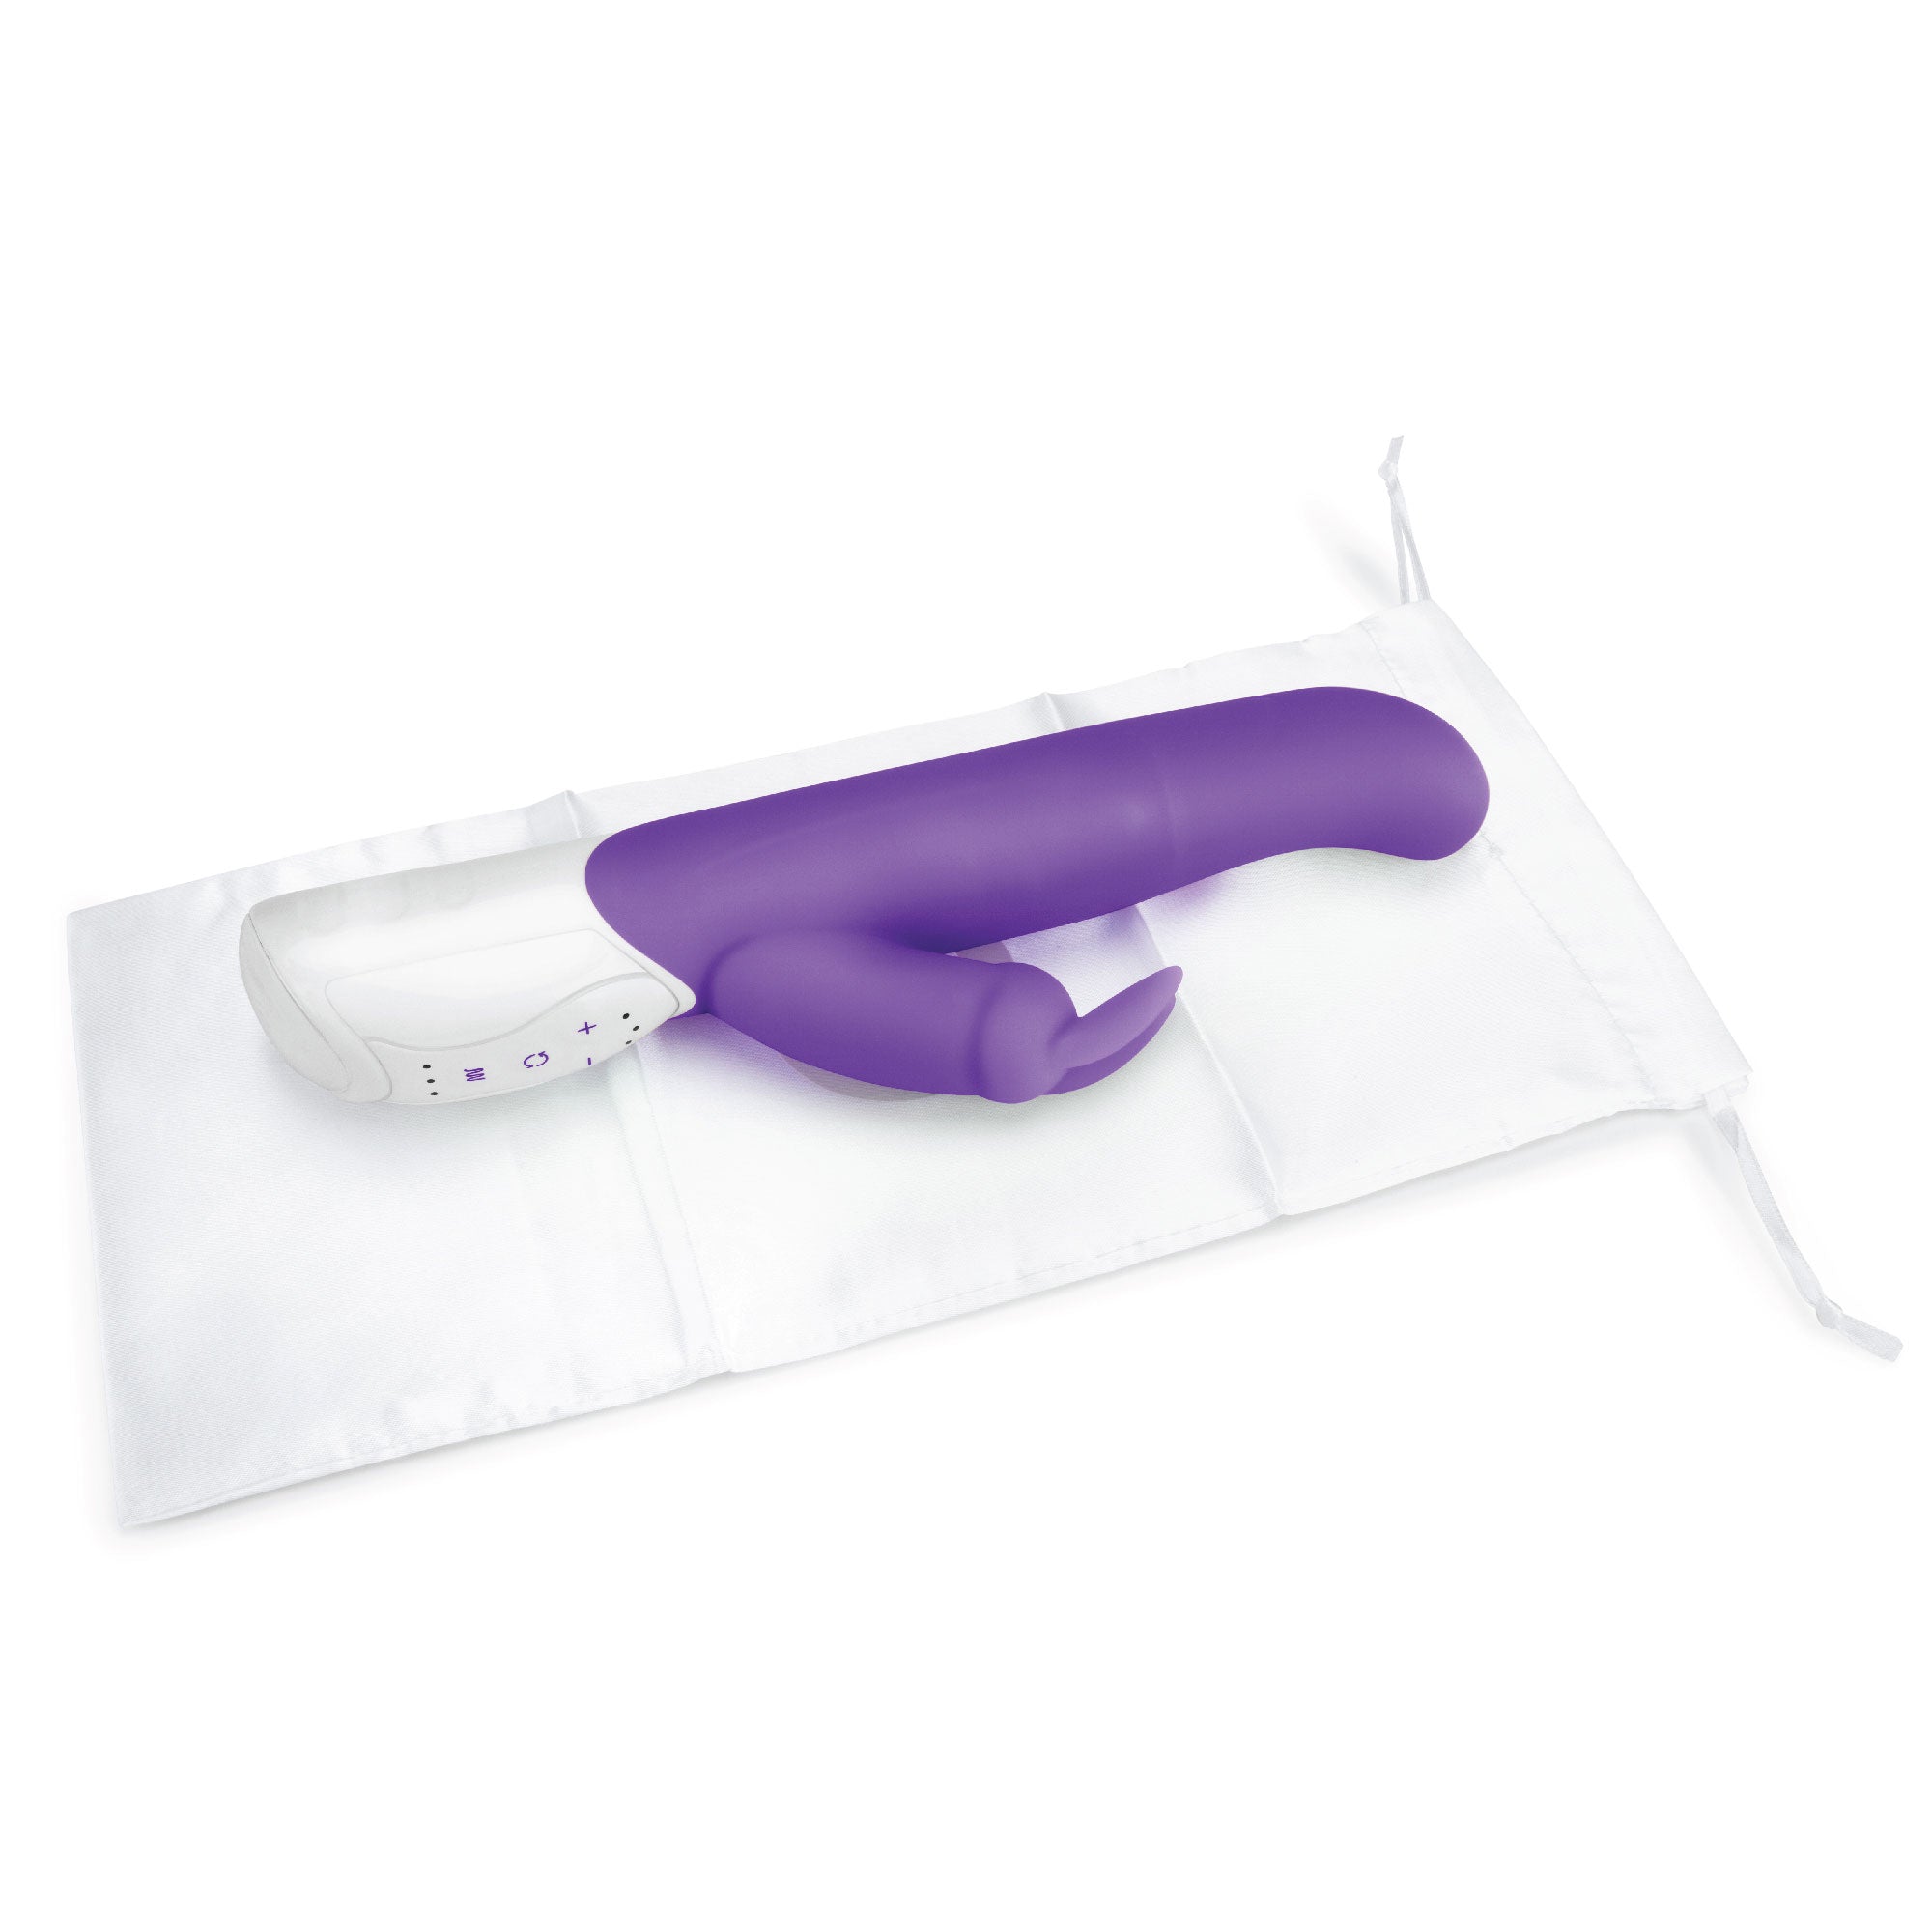 Rabbit Essentials G-Spot Rabbit Vibrator with Rotating Shaft in Purple with Storage Pouch at glastoy.com